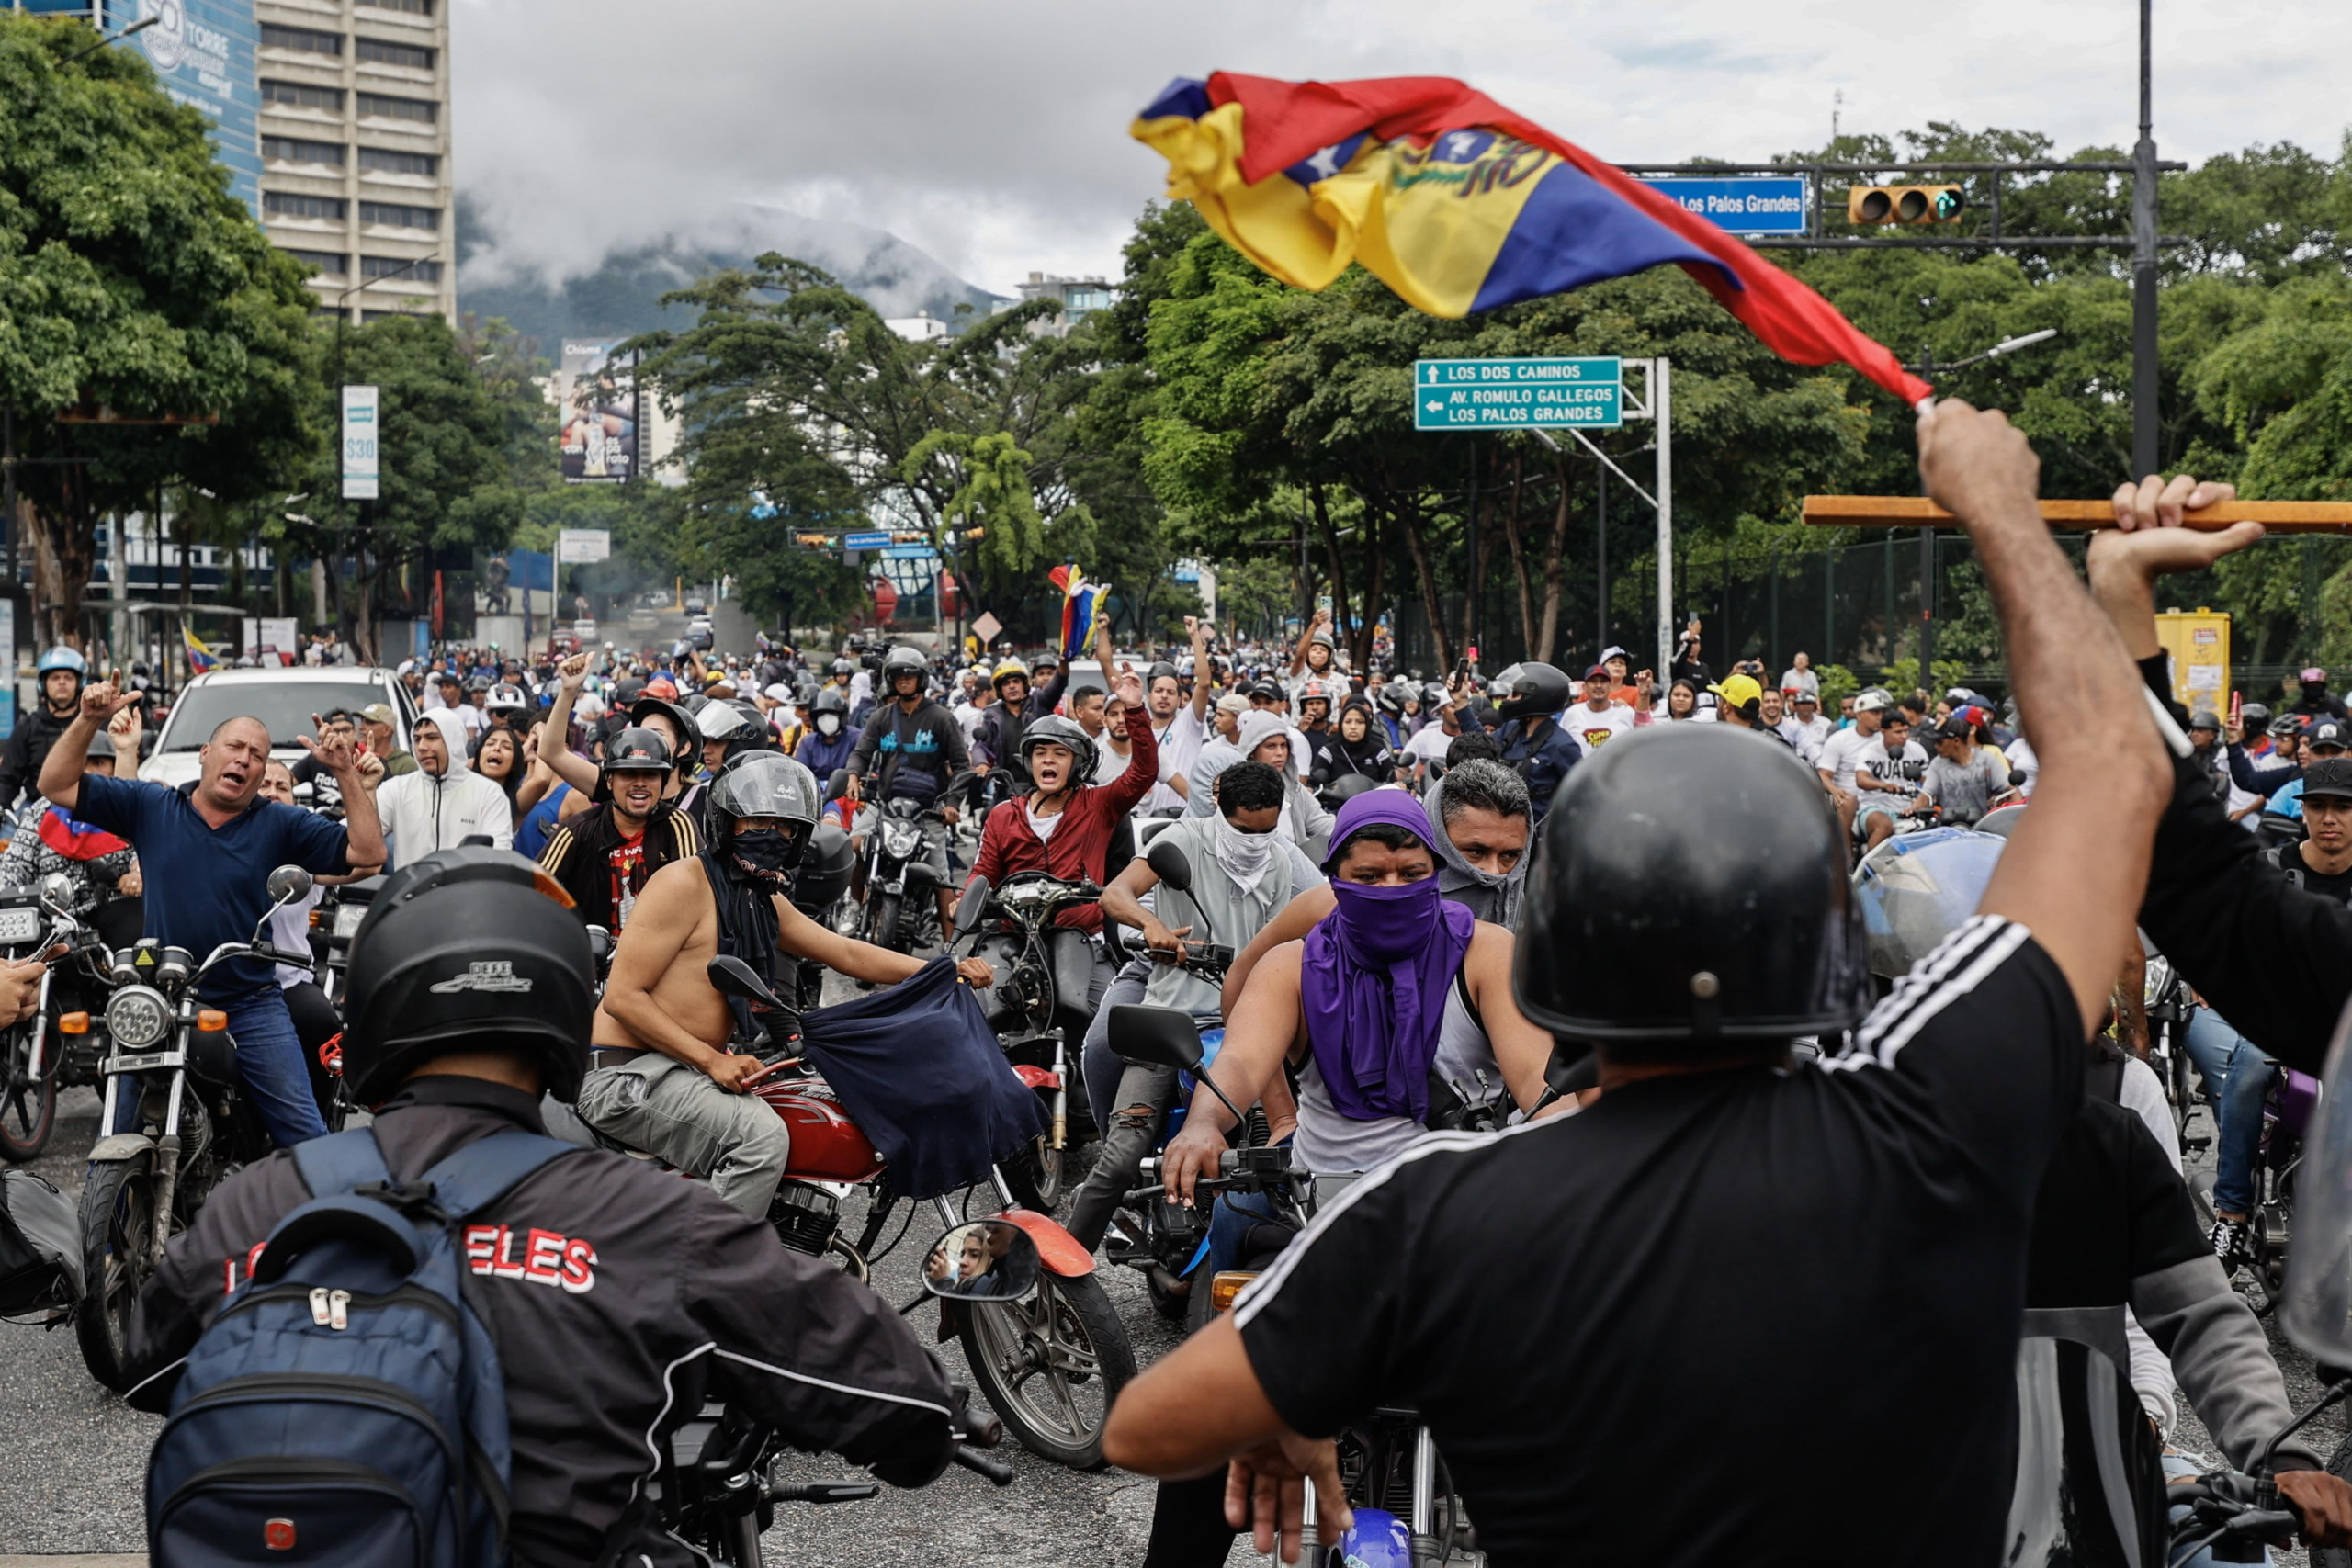 epa11507581 People ride through the streets on motorcycles during a protest against the results of the presidential elections, in Caracas, Venezuela, 29 July 2024. According to the first report from the National Electoral Council (CNE), Maduro was re-elected for a third consecutive term in the elections held on 28 July, in which he obtained 51.2 percent of the votes (5,150,092 votes), while the standard-bearer of the majority opposition, Edmundo Gonzalez Urrutia, obtained 4,445,978 votes, which represents 44.2 percent of the votes. The opposition is calling for the release of the full vote count.  EPA/Henry Chirinos